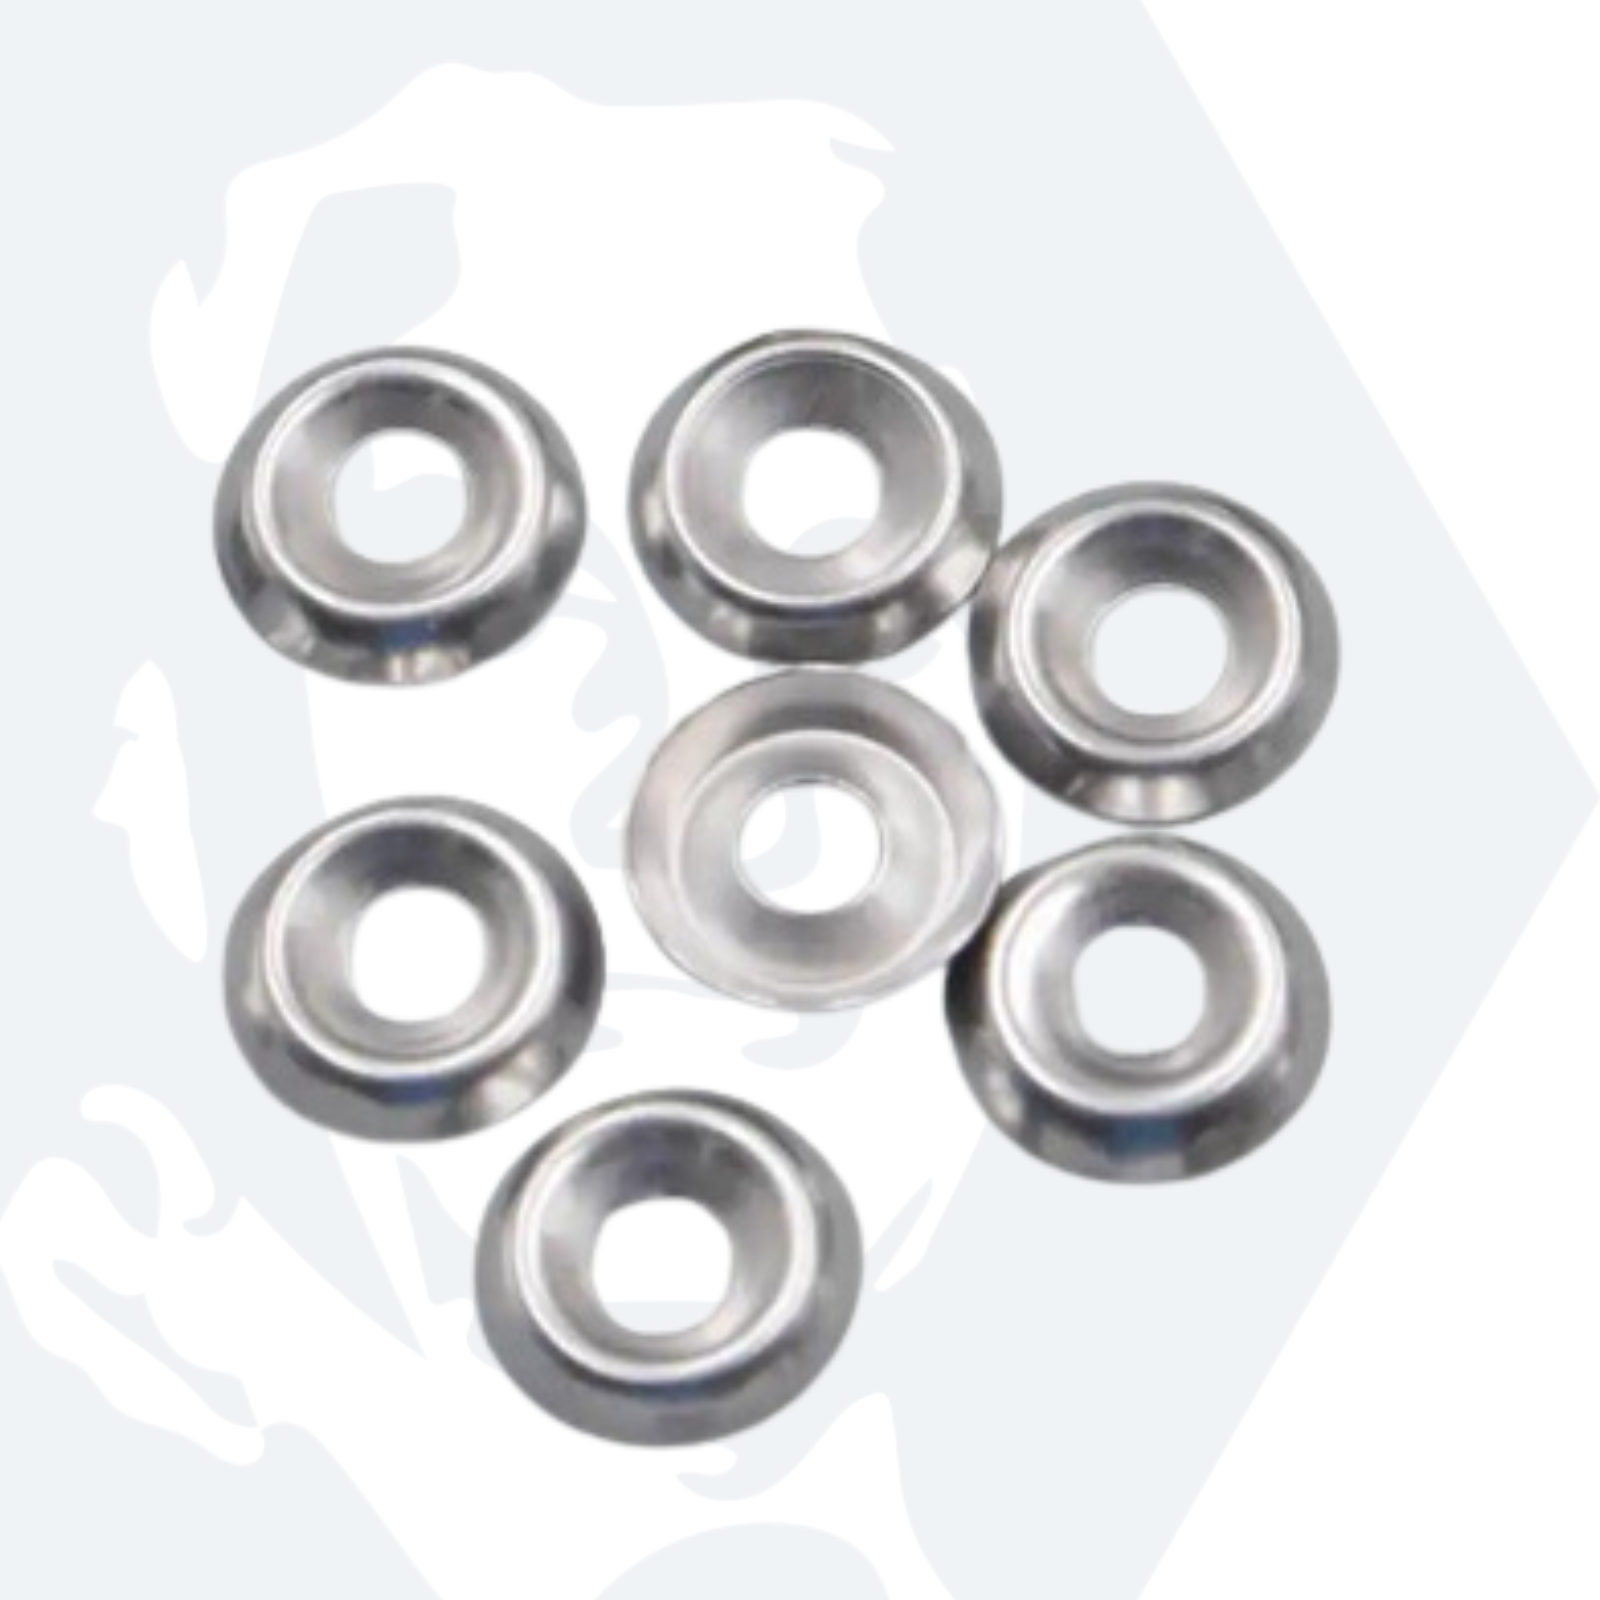 #10 Cup Washers - Stainless Steel (A2)